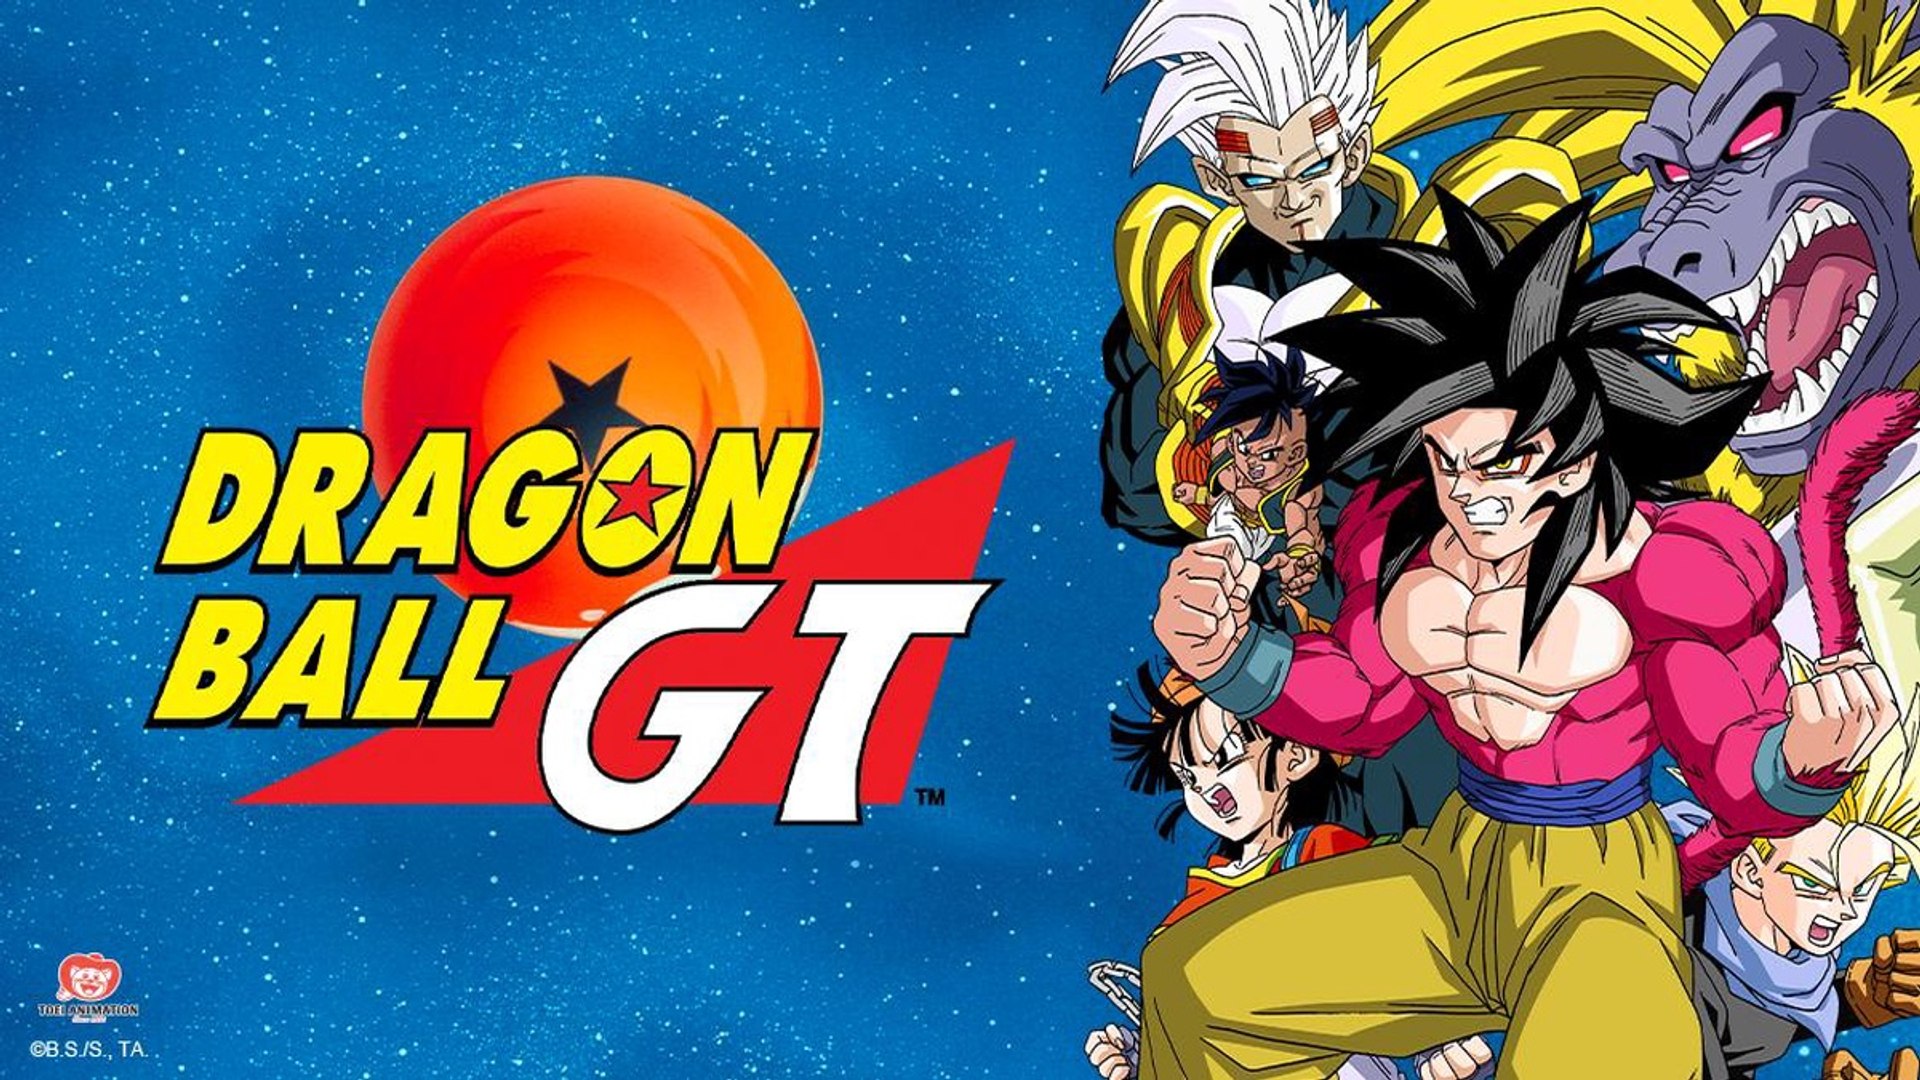 Dragon Ball Classic, Z, GT Completo - Torrent - Vídeo Dailymotion